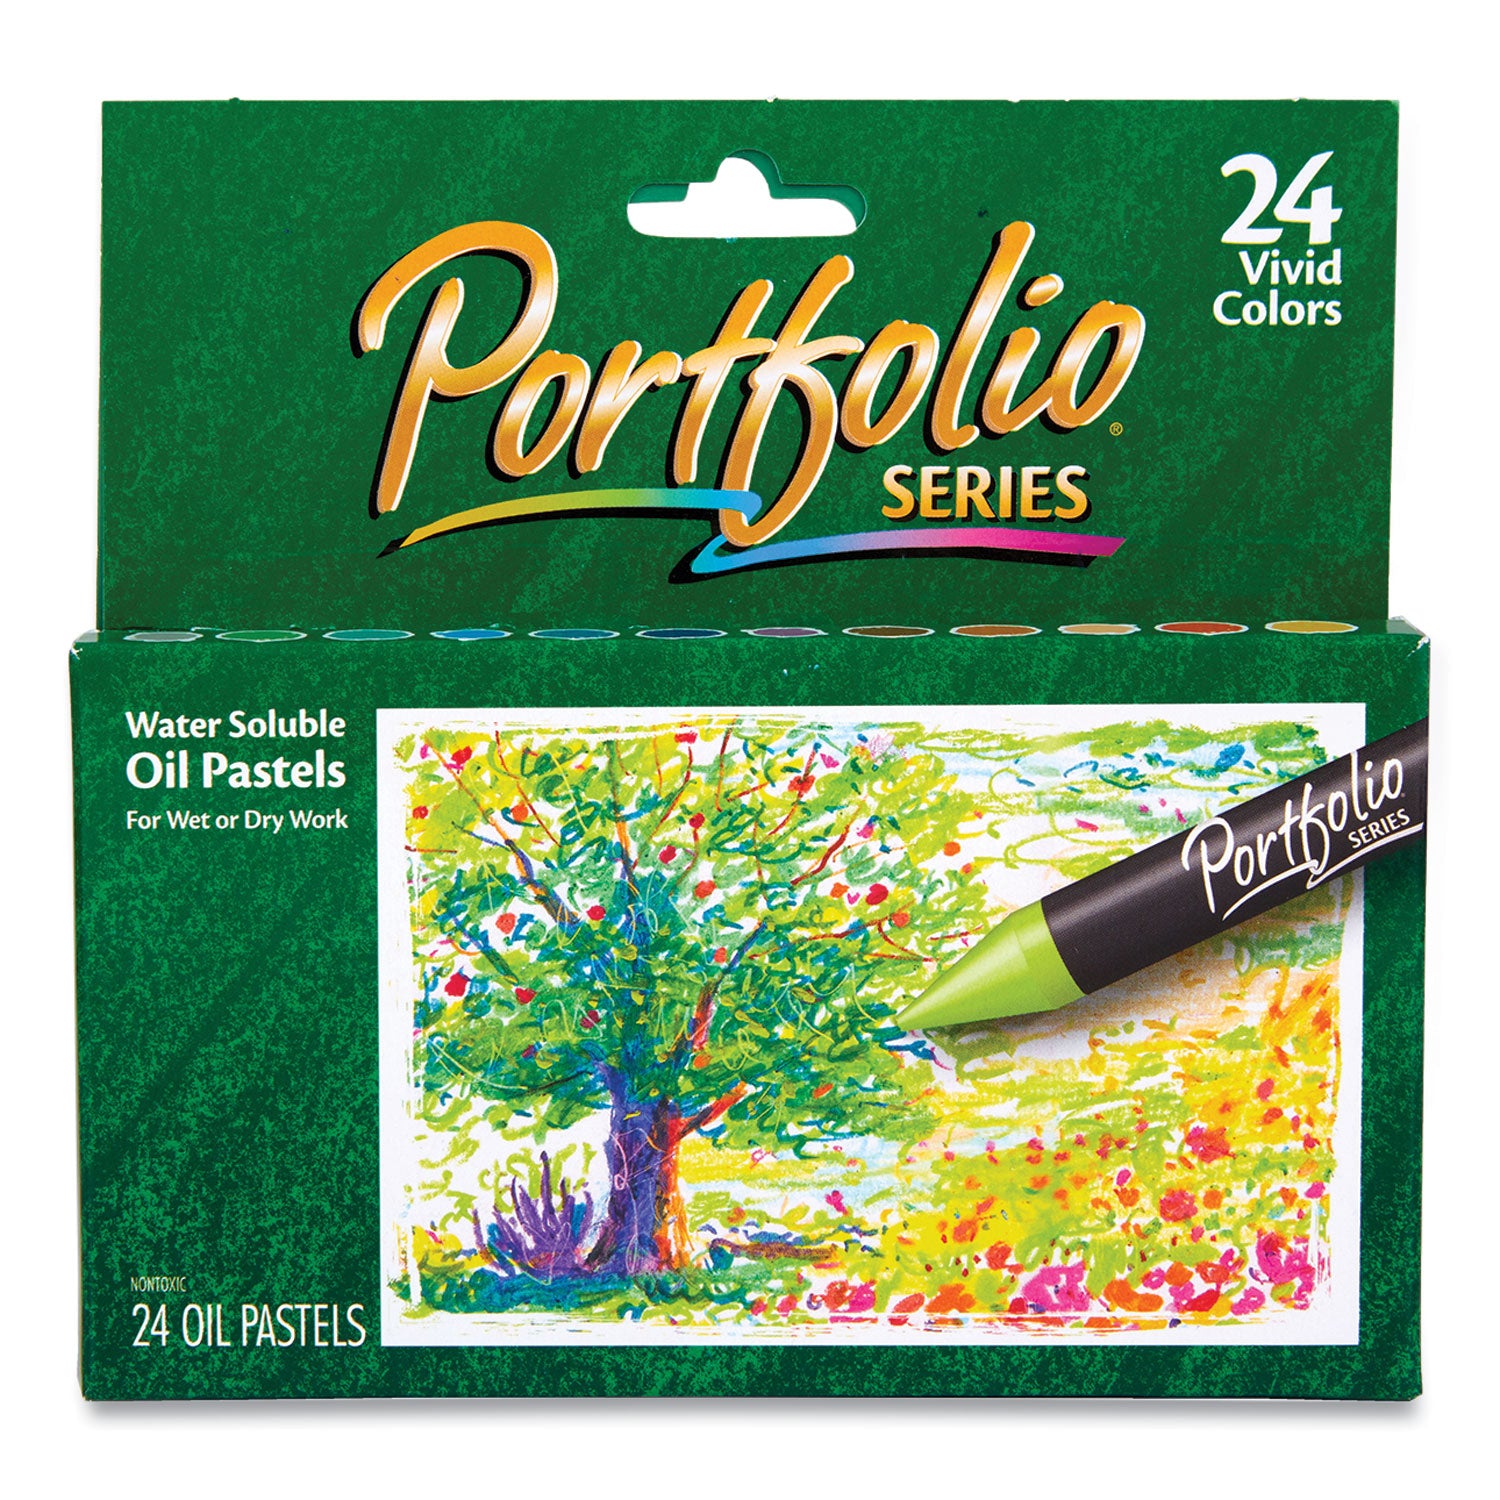 portfolio-series-oil-pastels-24-assorted-colors-24-pack_cyo523624 - 1